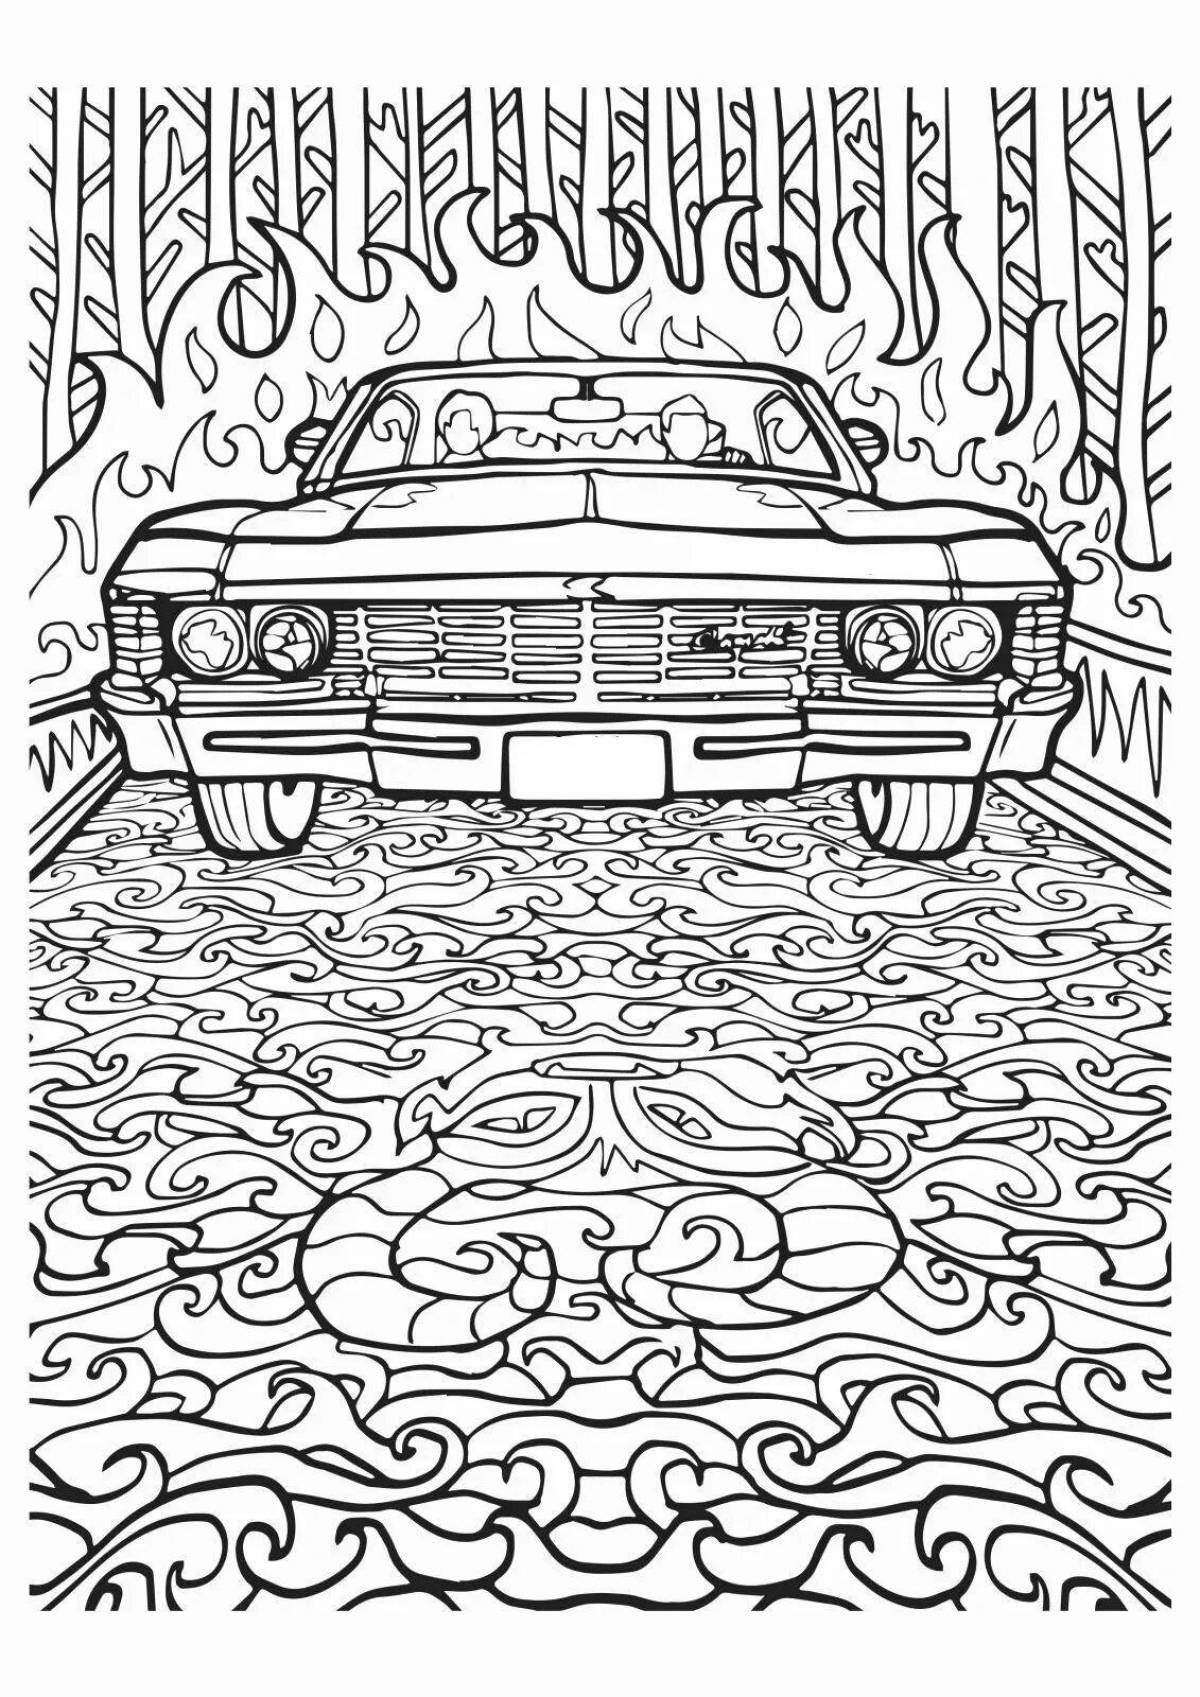 Coloring book soothing anti-stress cars